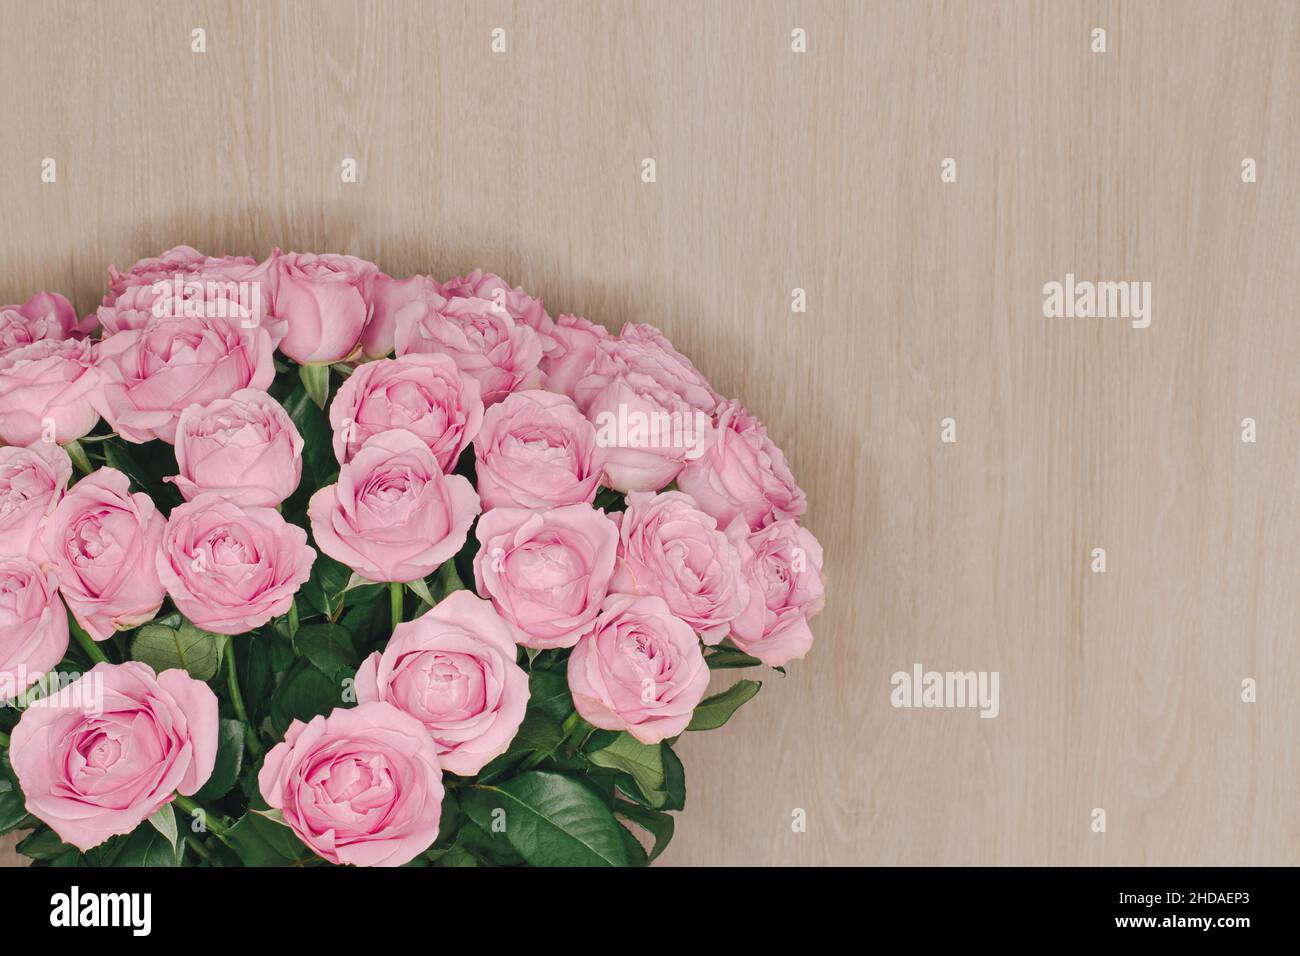 Large bouquet of delicate roses on light wooden background Stock Photo